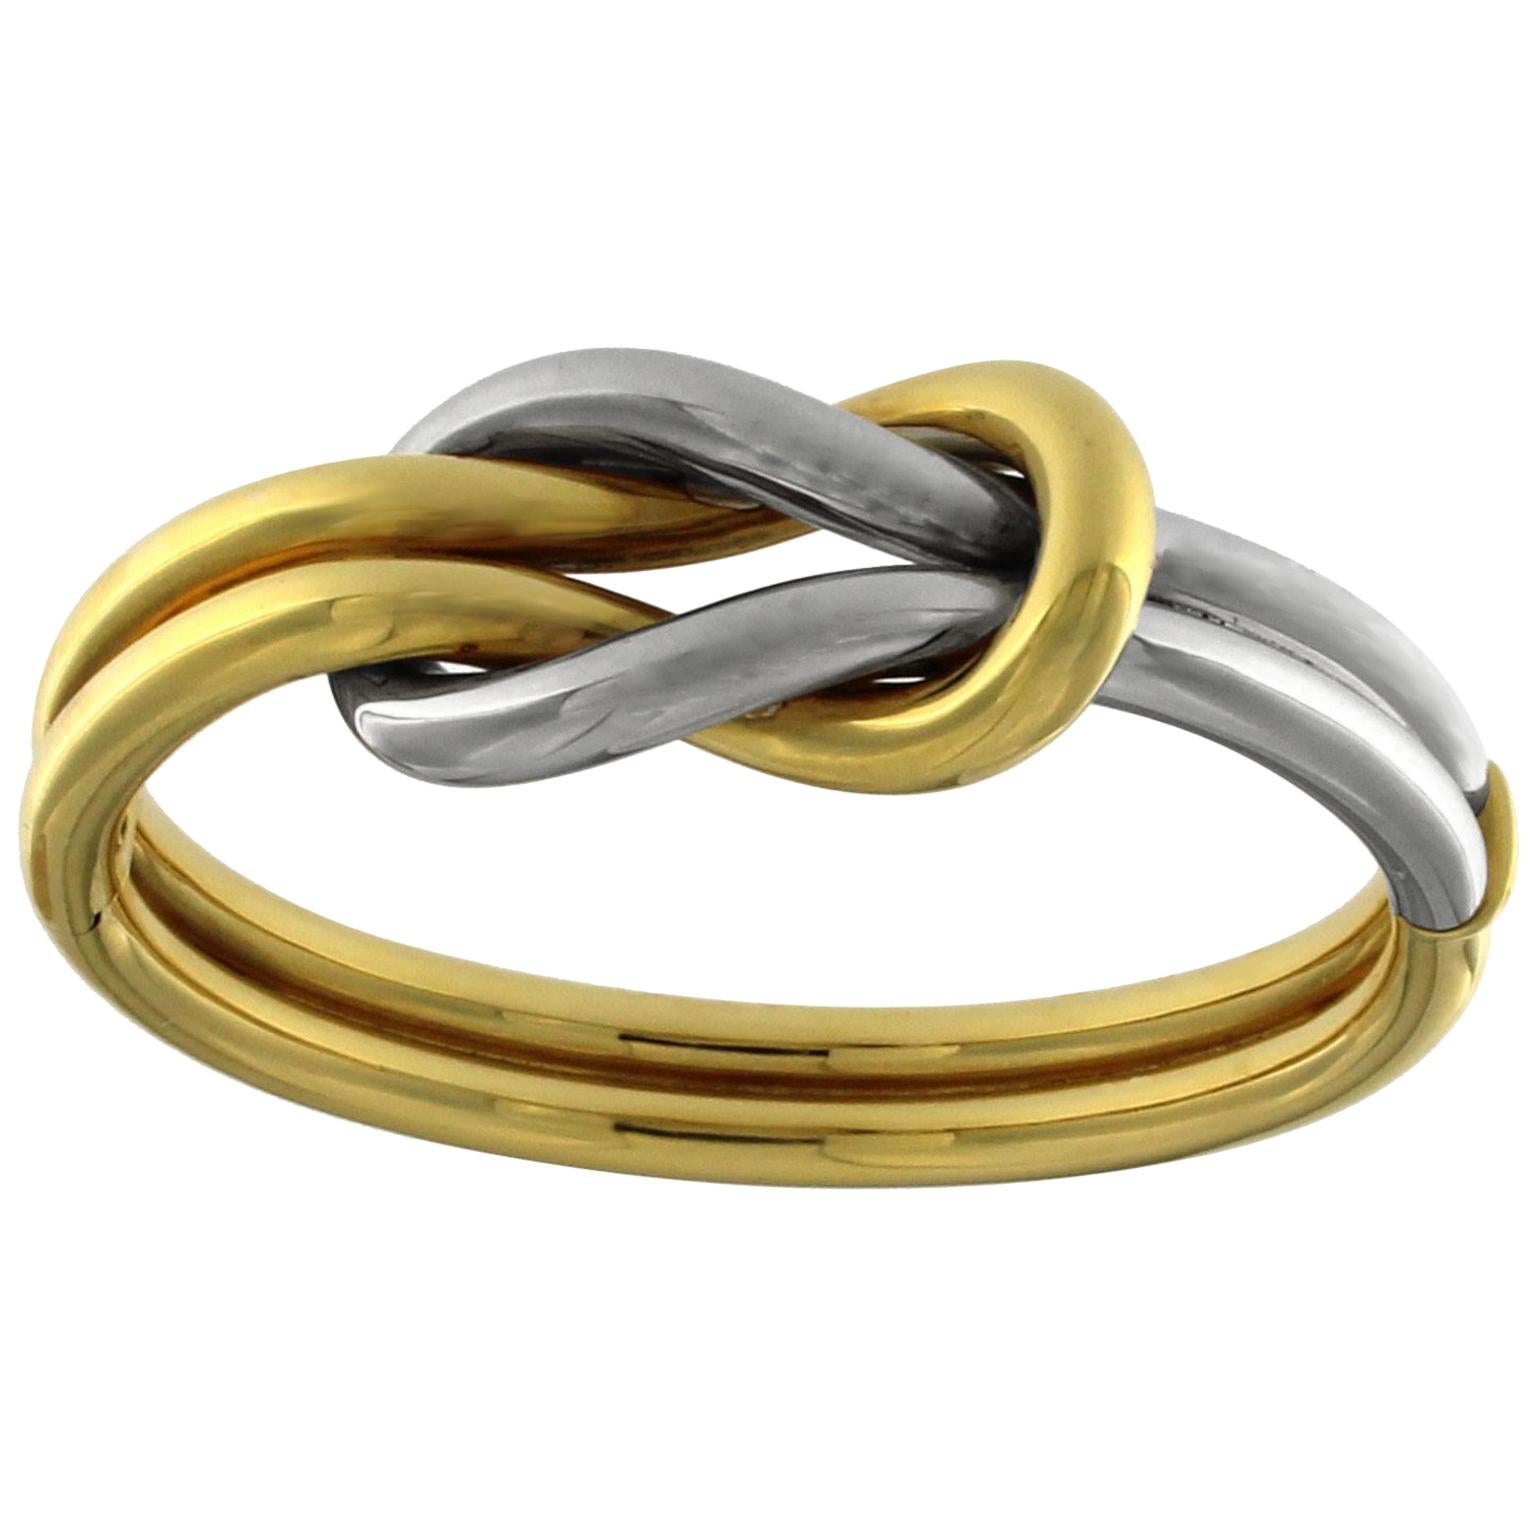 Double Knot Bangle in White and Yellow 18 Karat Gold